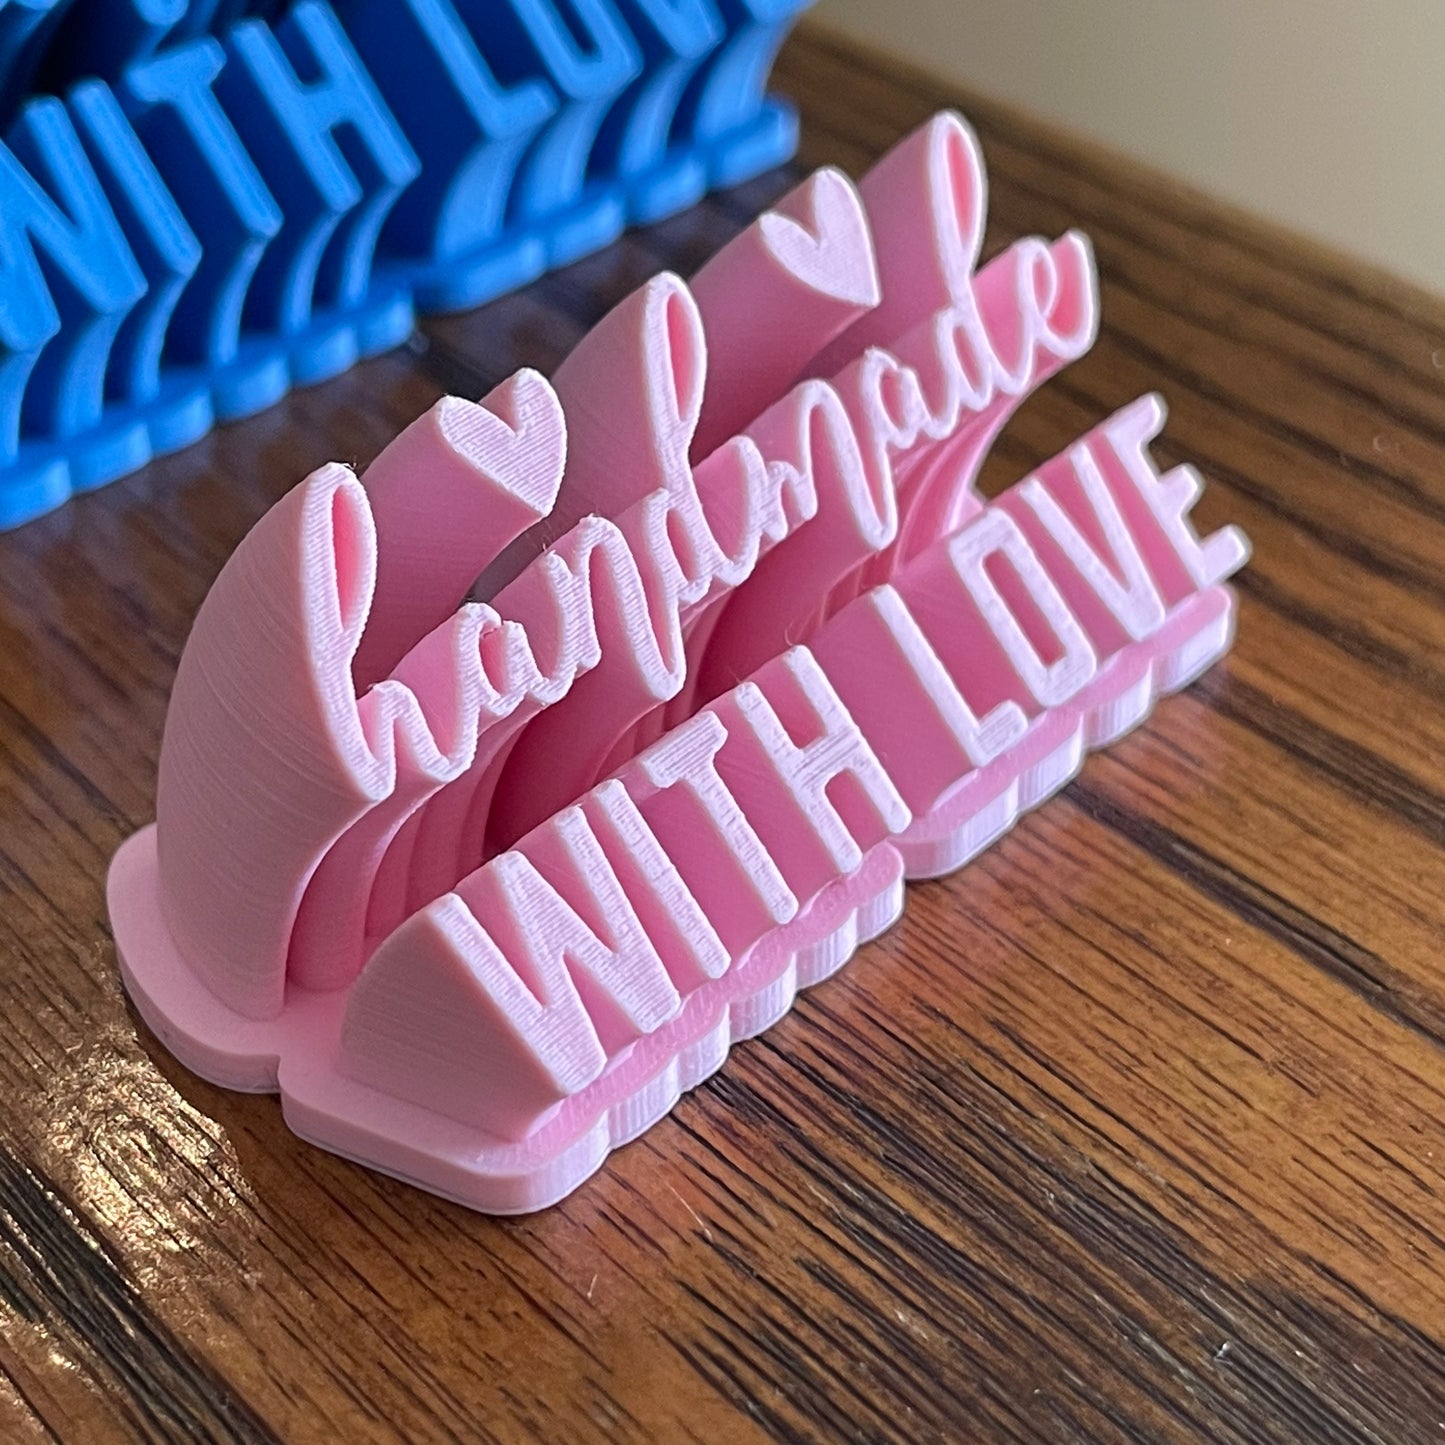 Handmade with love - sweeping text display